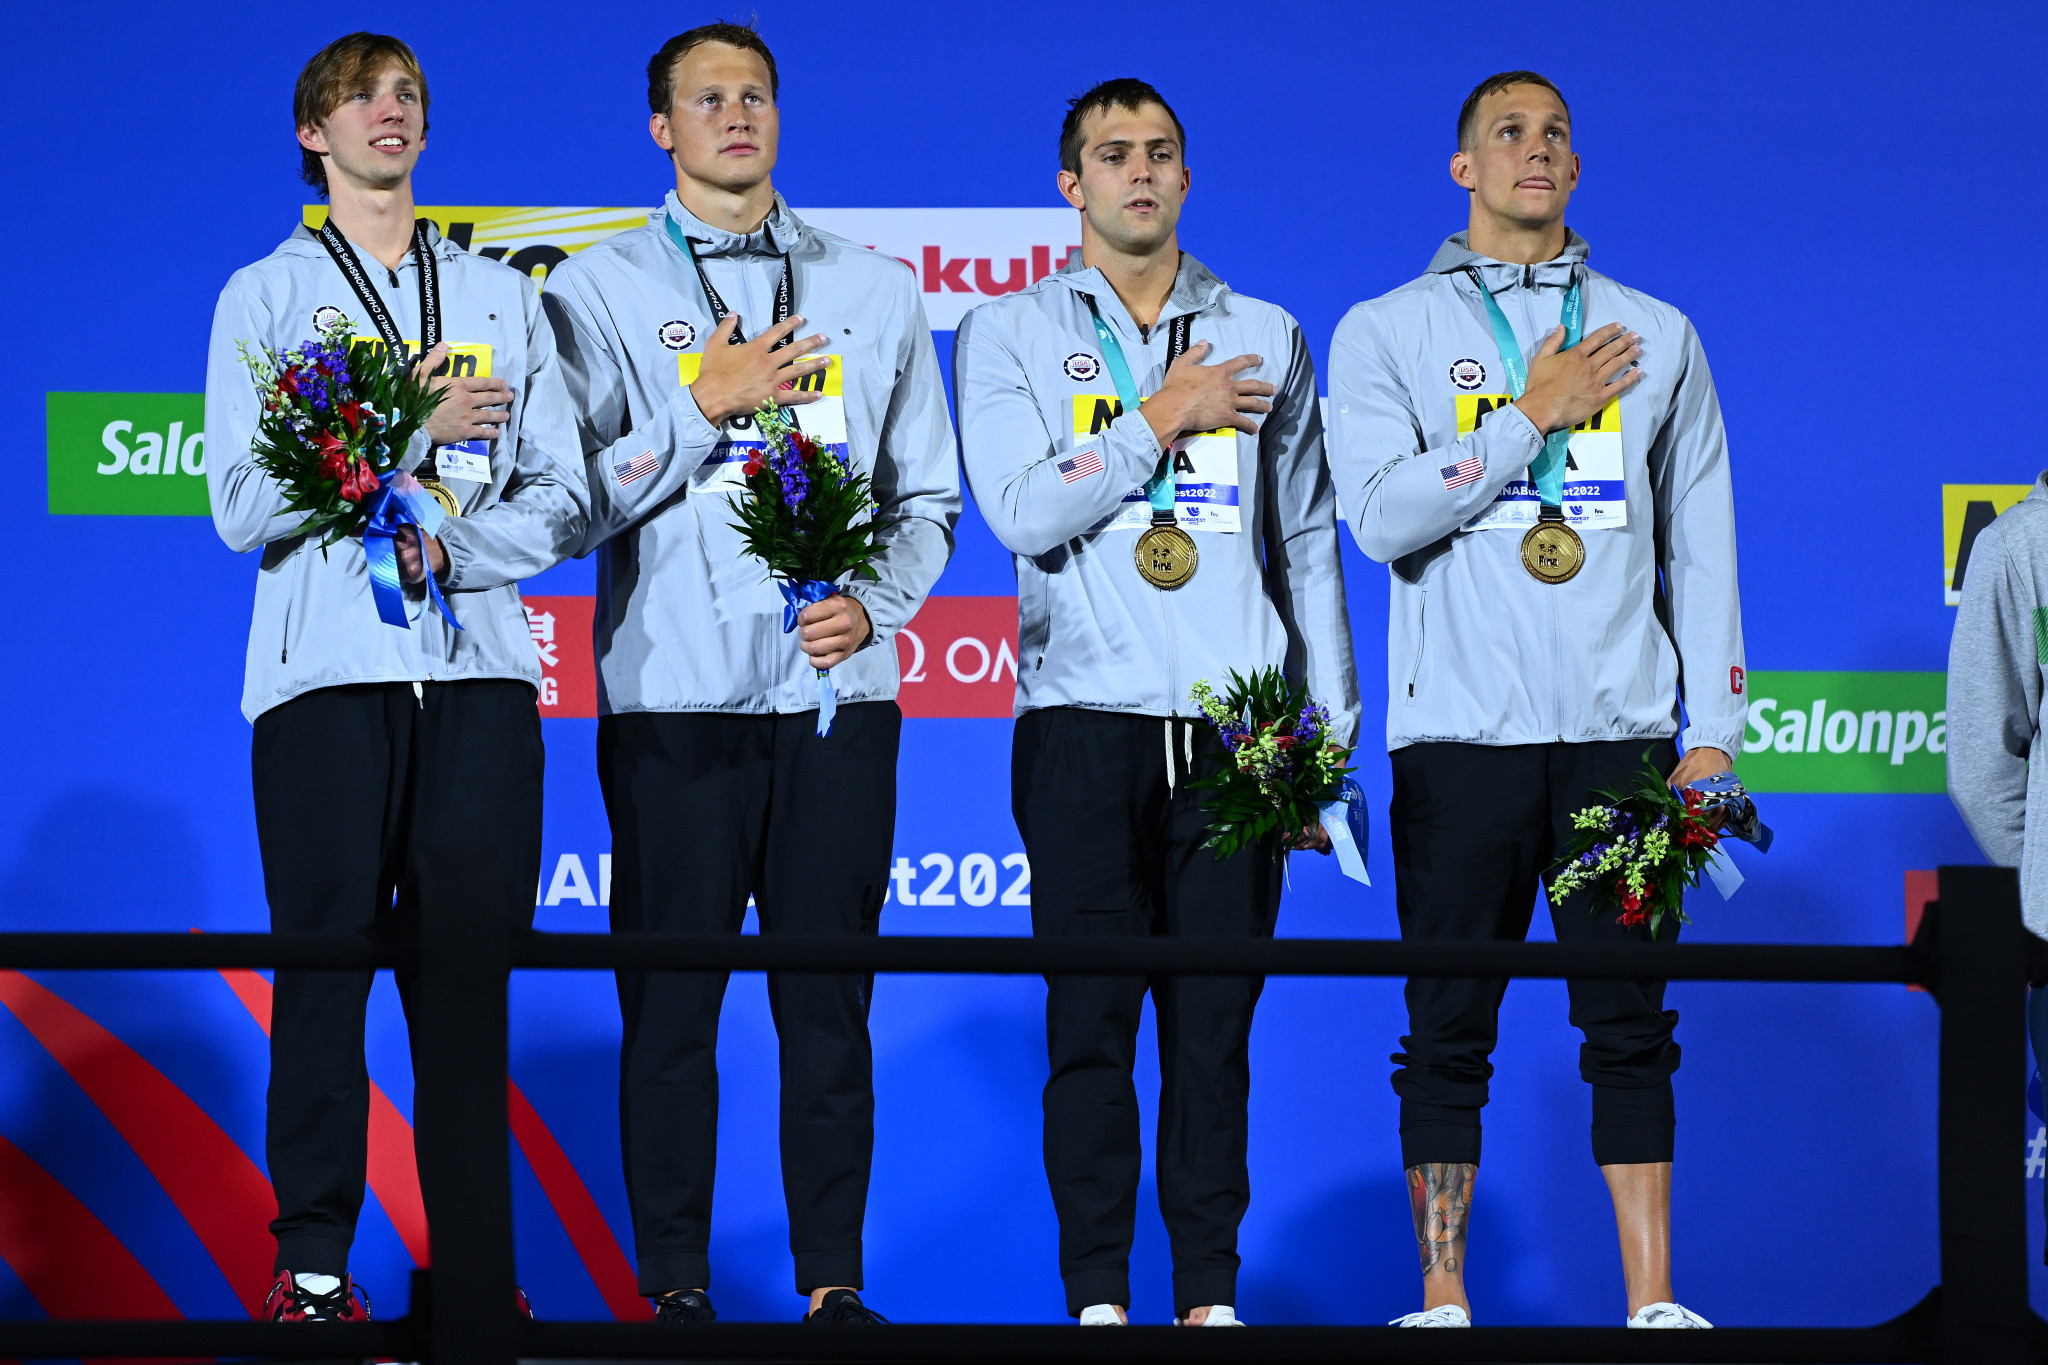 Brooks Curry, furthest left, Justin Ress, second left, Ryan Held, second right, and Caeleb Dressel, furthest right, collected gold for the US in the men's 4x100m freestyle relay ©Getty Images